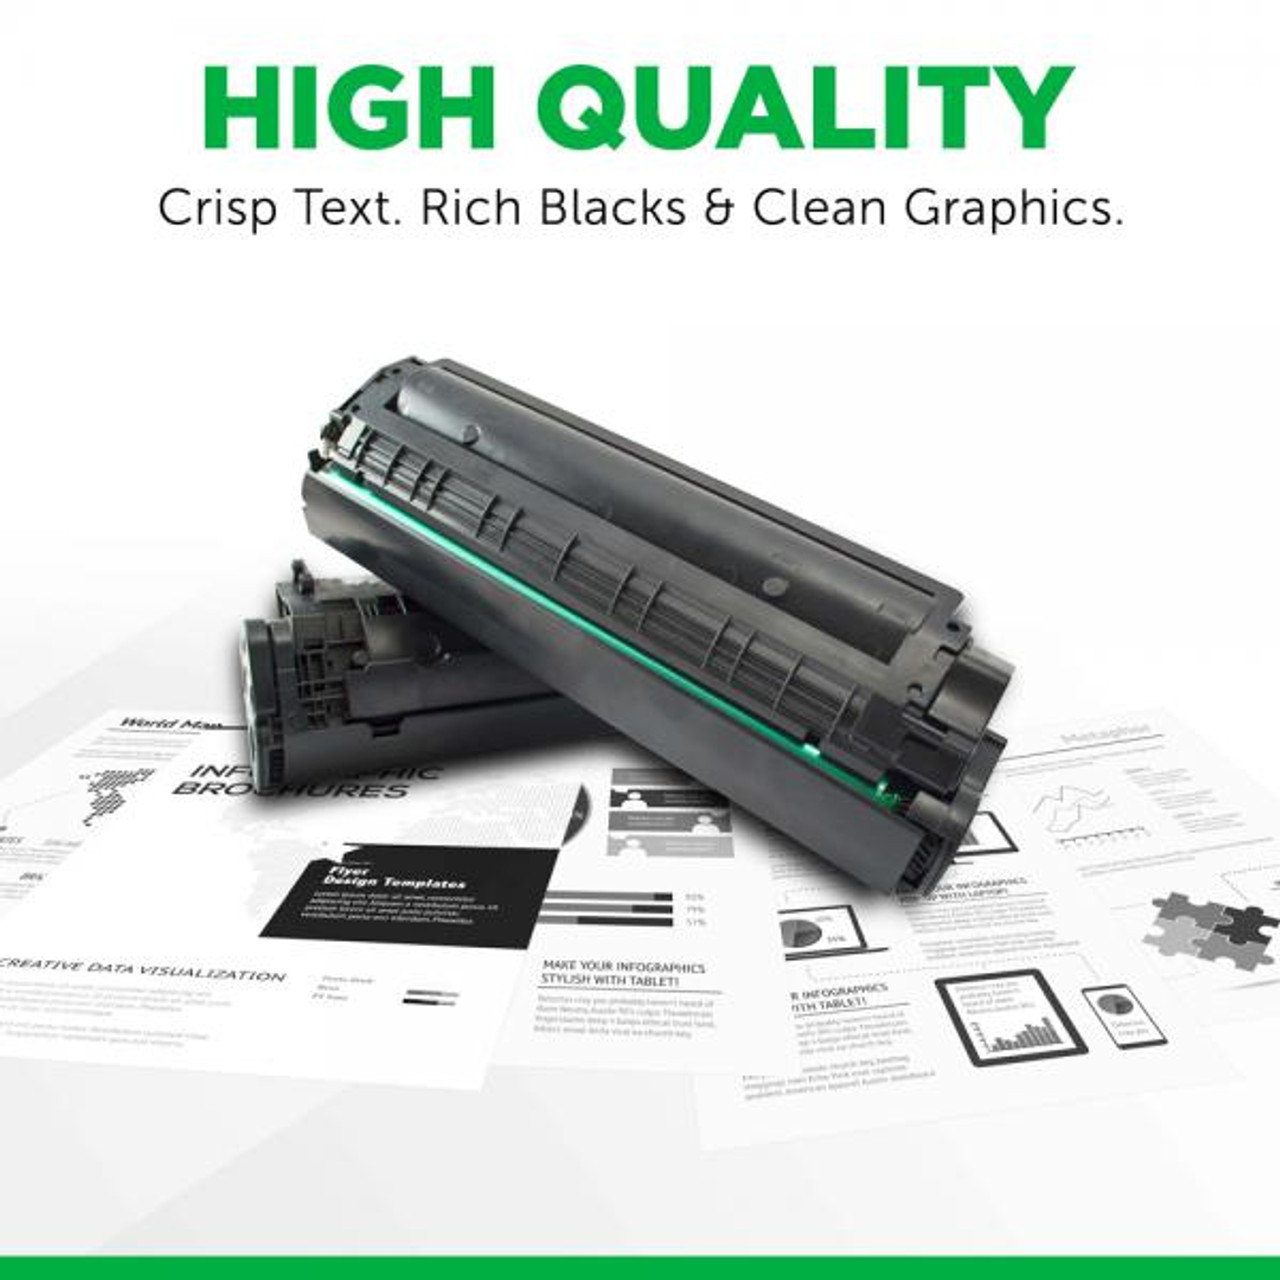 High Yield Toner Cartridge for Dell 5330-4